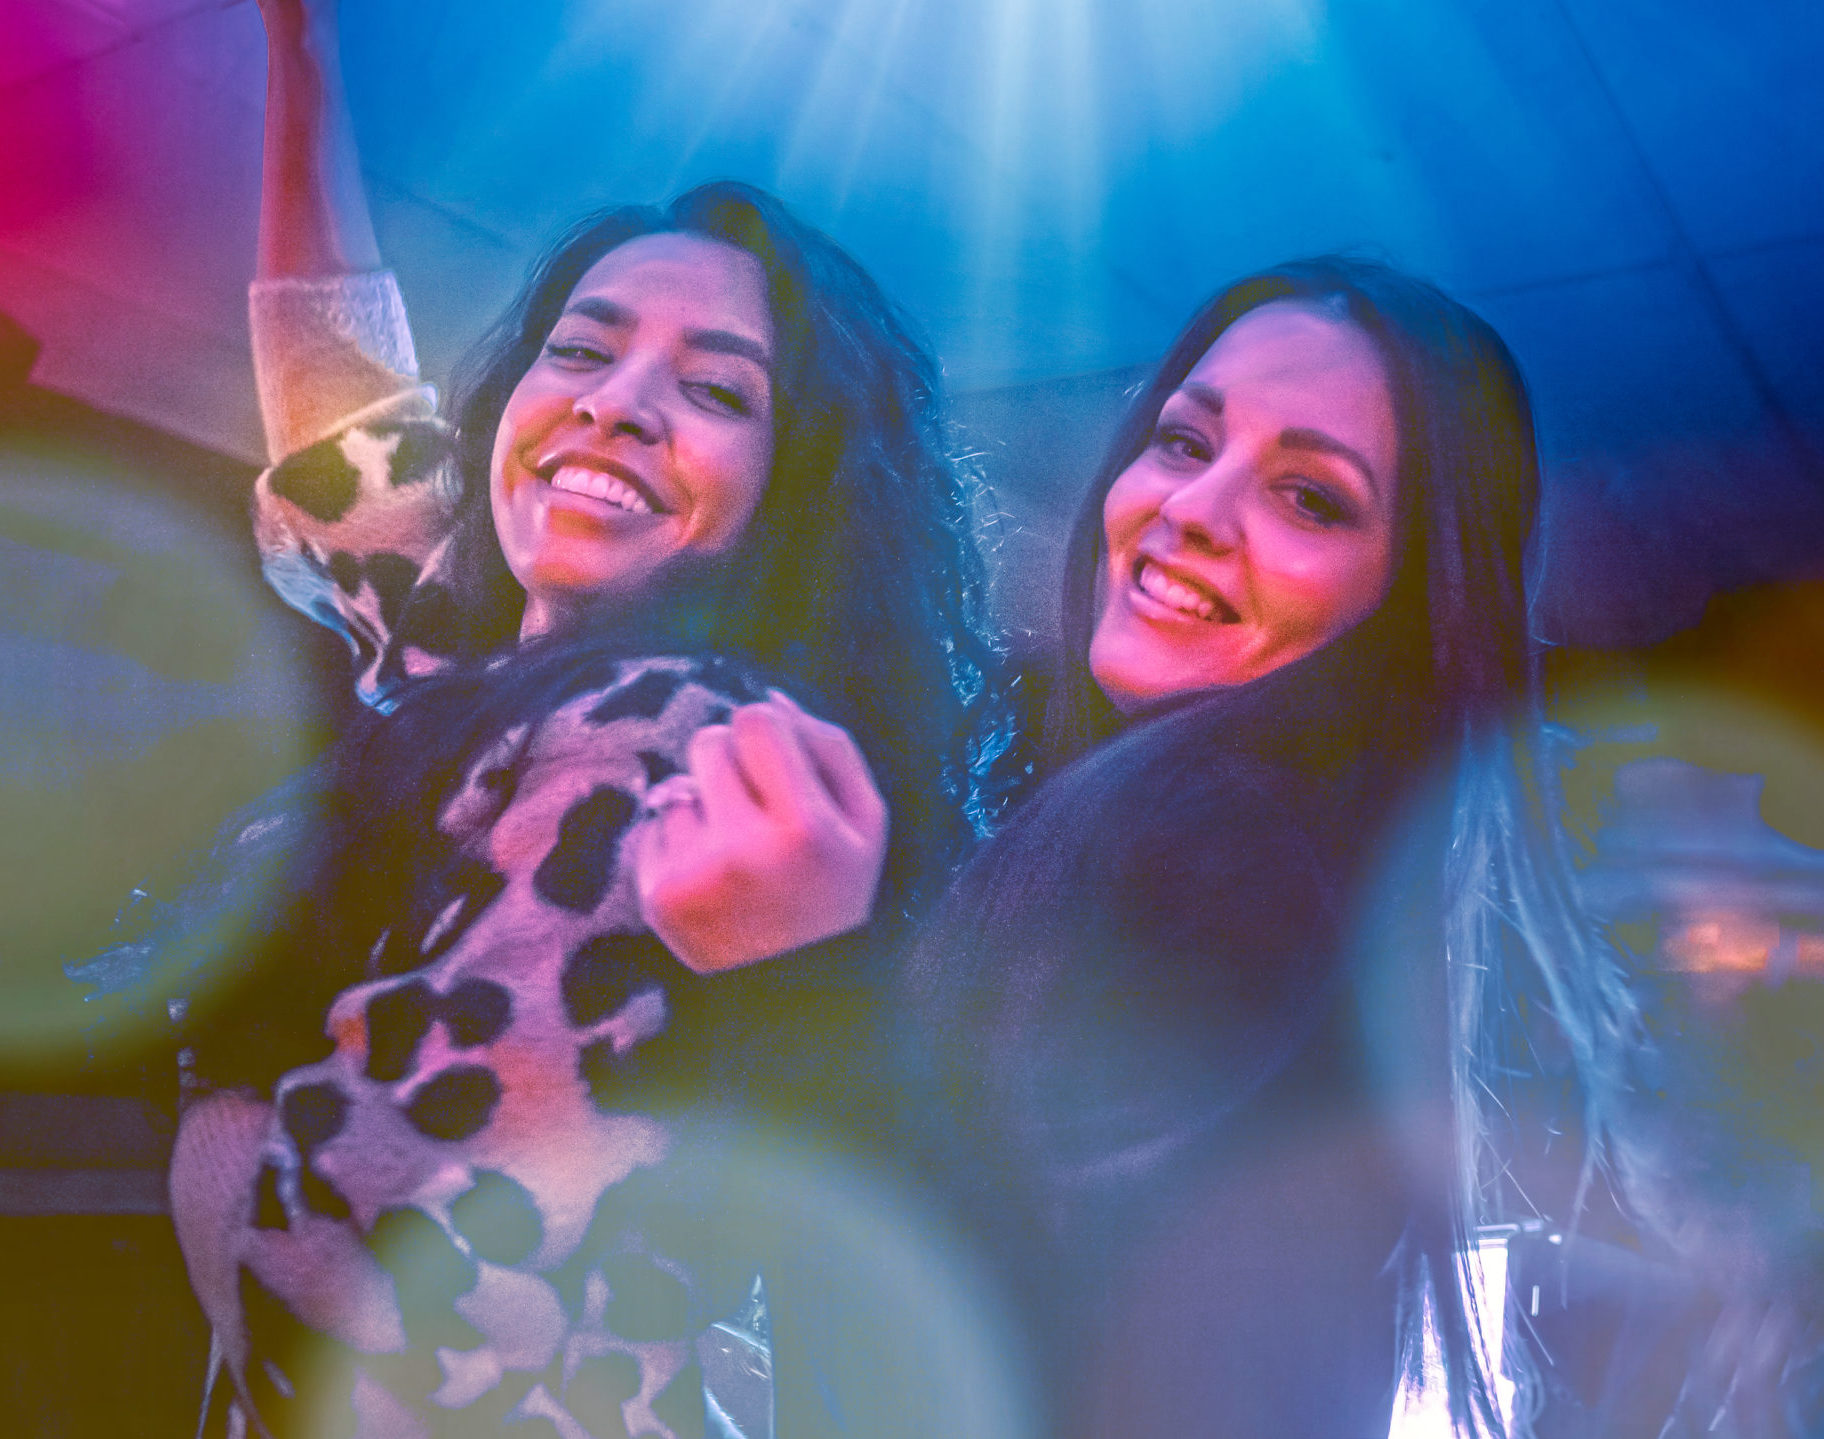 Two women dancing with colorful background